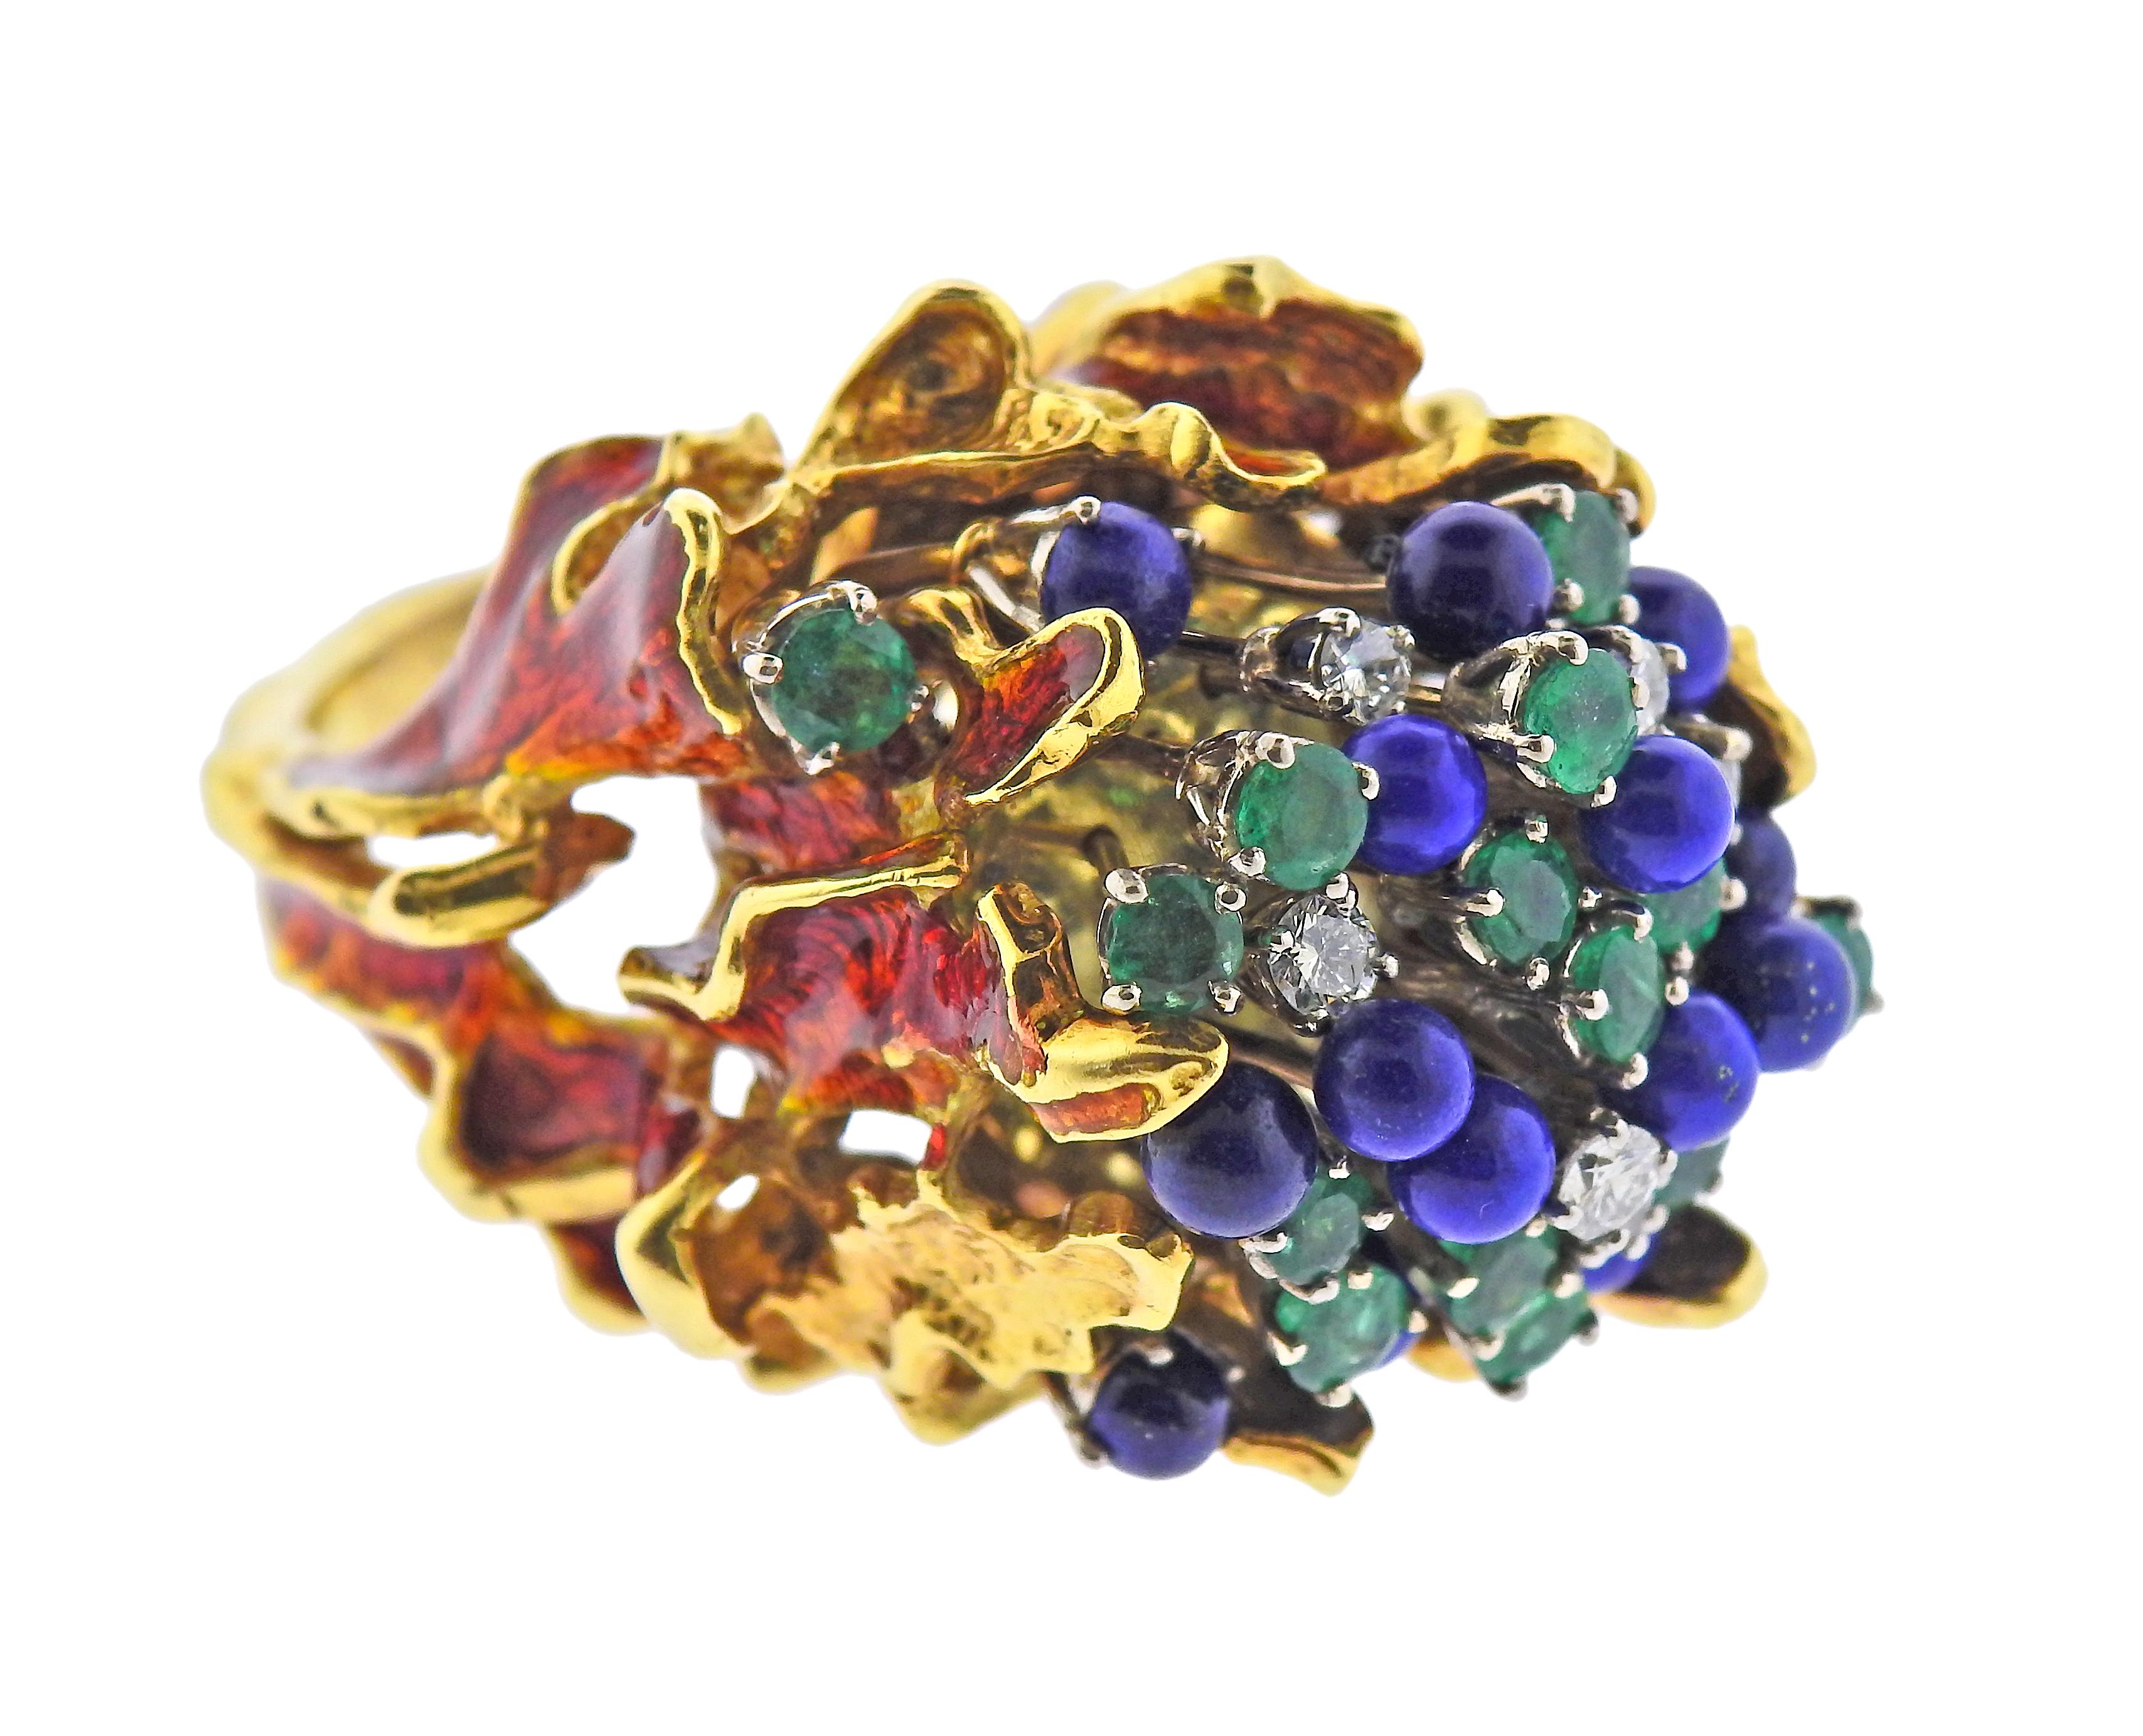 1970s large free form cocktail ring, set with lapis, emeralds and approx.0.60ctw in diamonds, decorated with enamel, 18k gold. Ring size 7.25, ring top is 30mm x 32mm, sits approx. 28mm from the finger. Marked GB 18k, Italy. Weight - 58.3 grams.